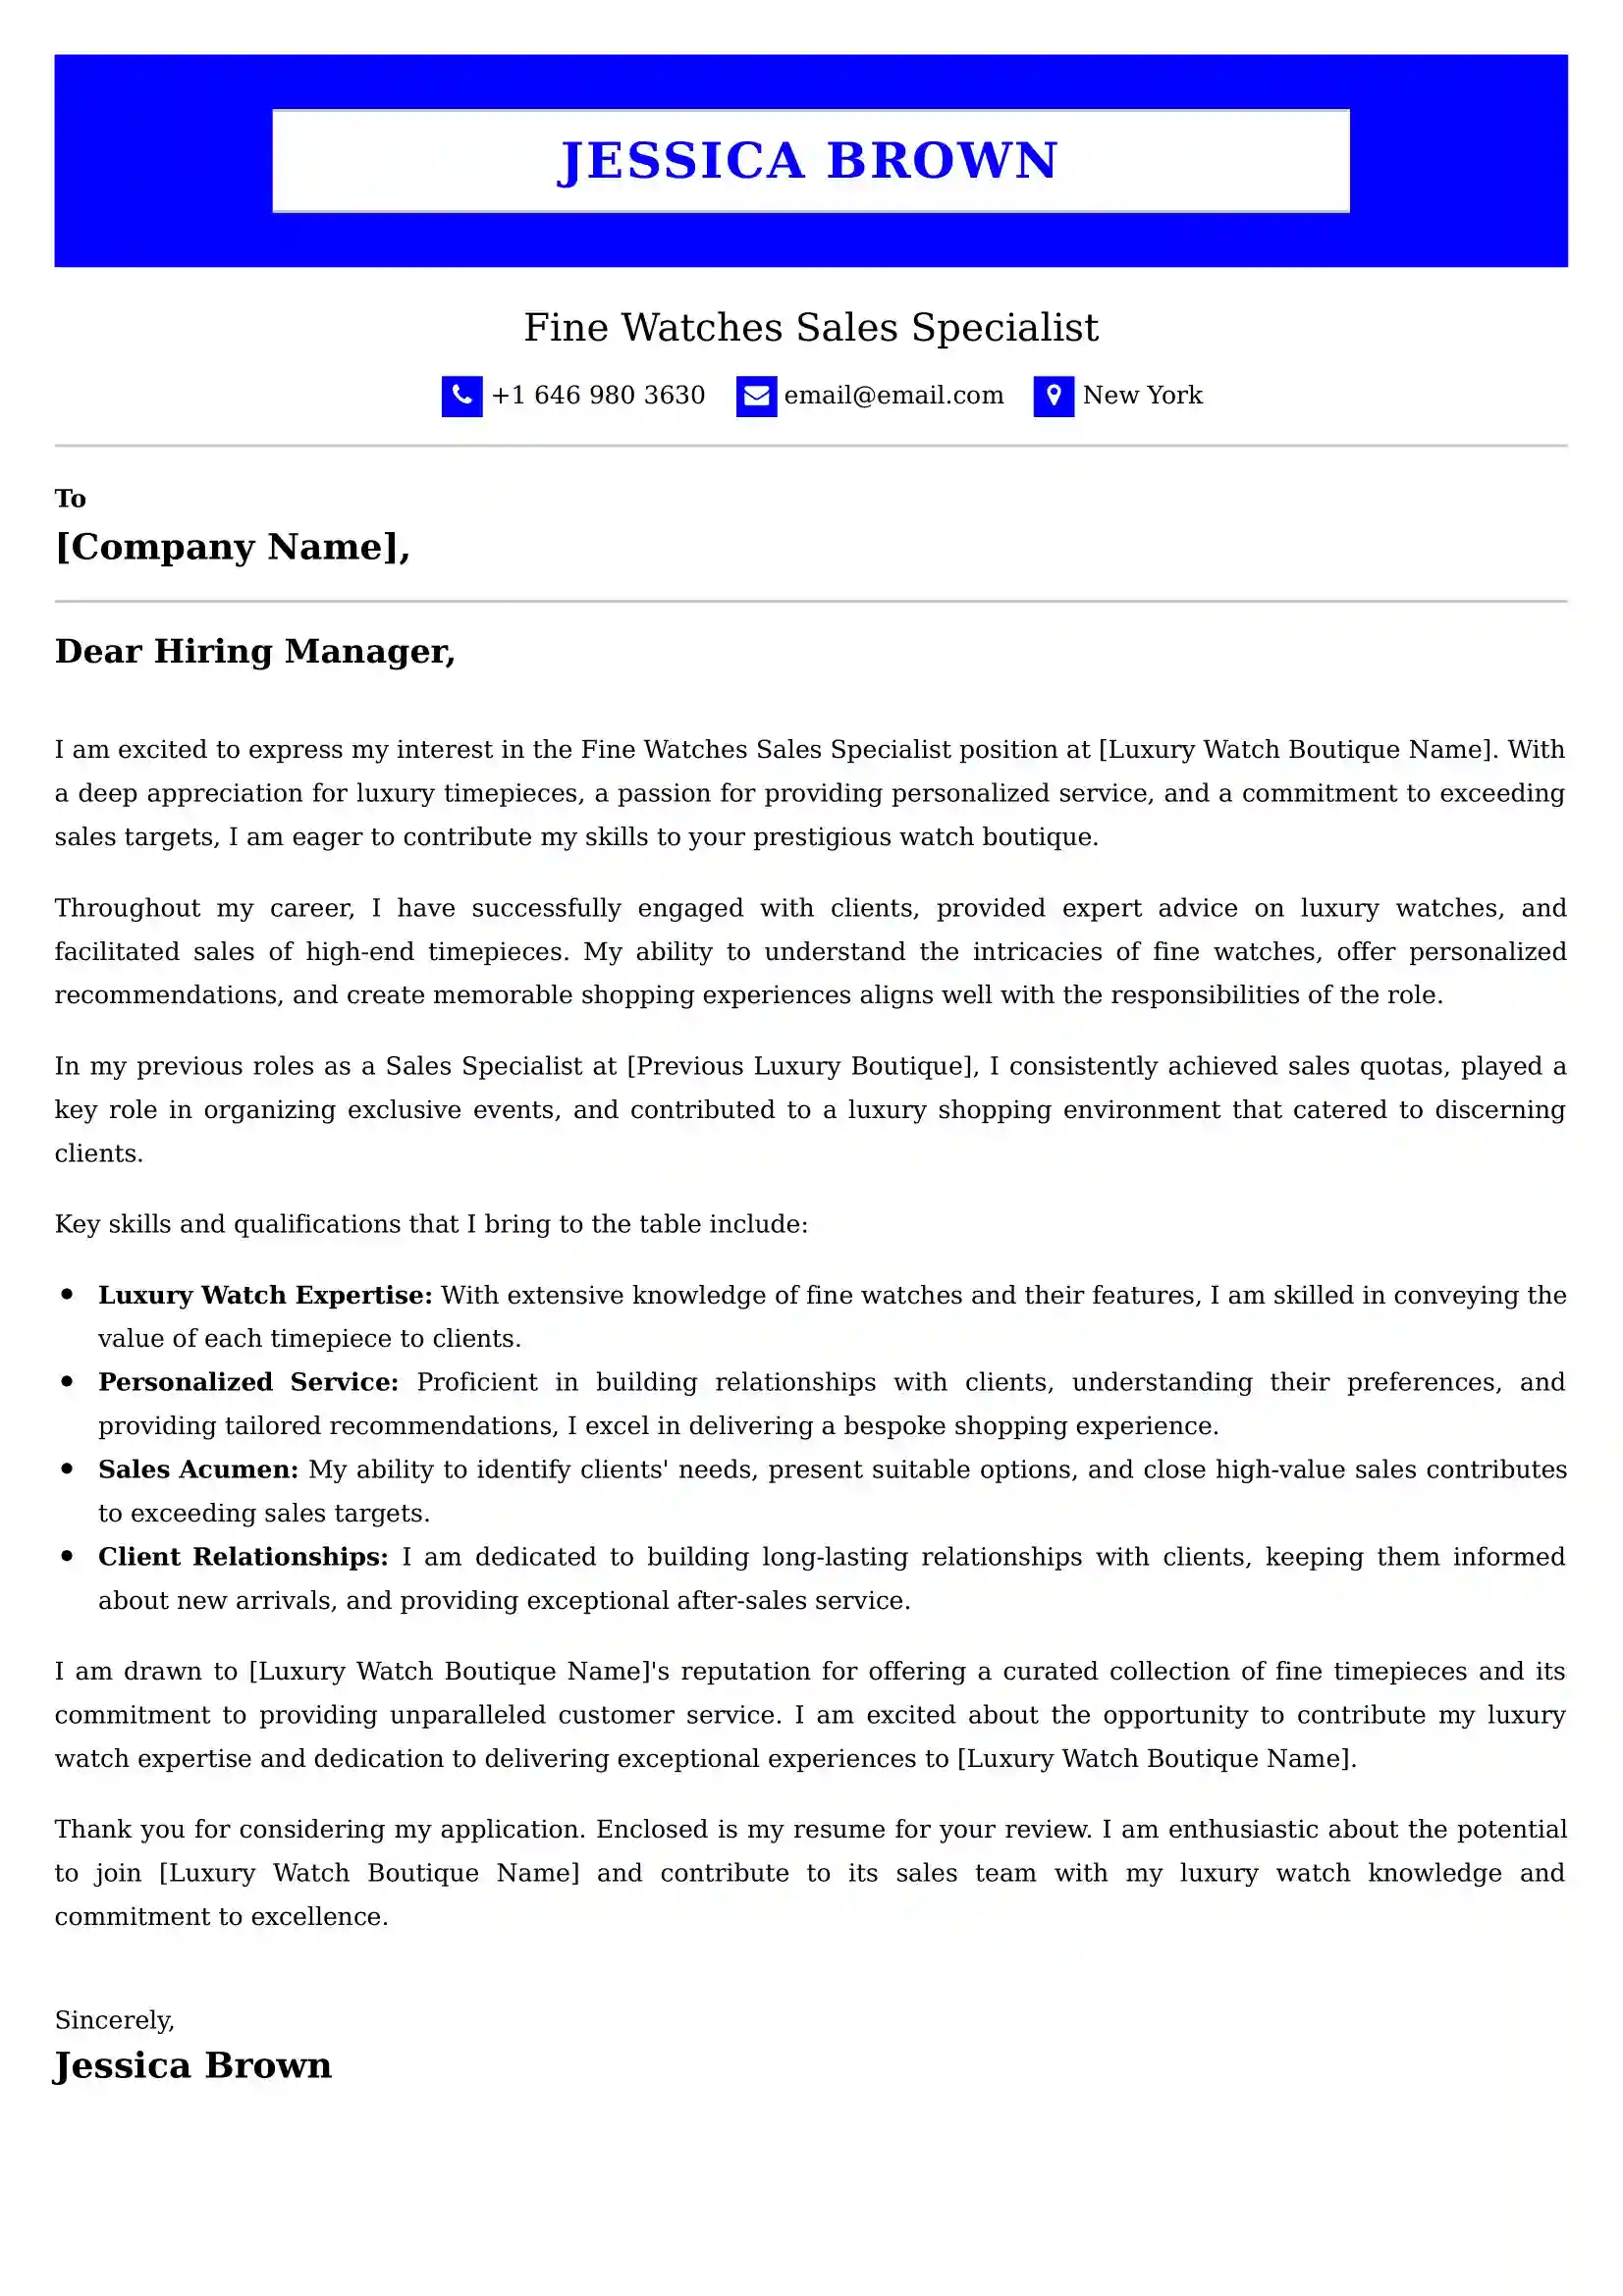 Fine Watches Sales Specialist Cover Letter Examples for UK 